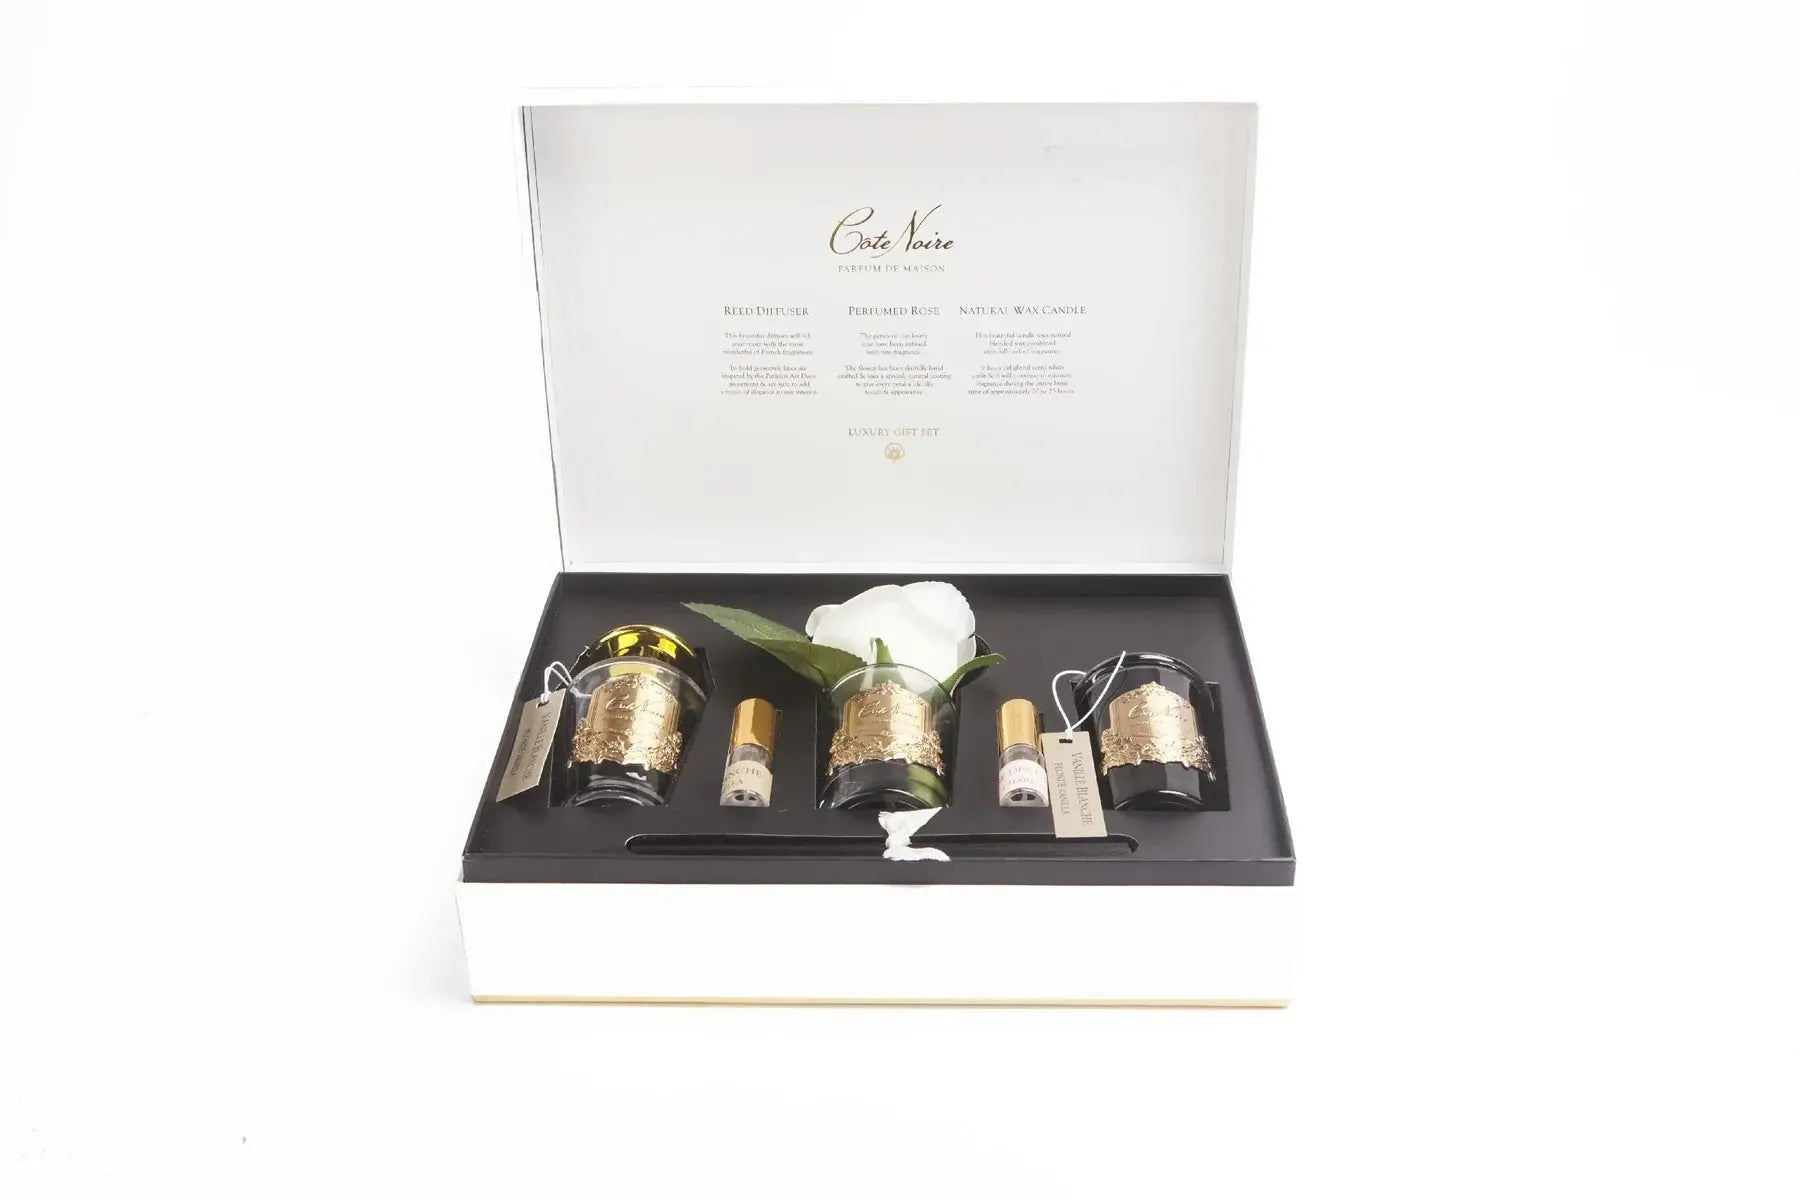 The image displays an open luxury gift set from Cote Noire. Inside the white box with gold edges, the set includes three glass jars with gold labels, each containing either a reed diffuser, a perfumed rose, or a natural wax candle. A single white rose with a stem is also prominently displayed in the center of the box. Each jar is tagged with a small, elegant label that describes the contents. The inner lid of the box contains descriptive text about each item in the set.